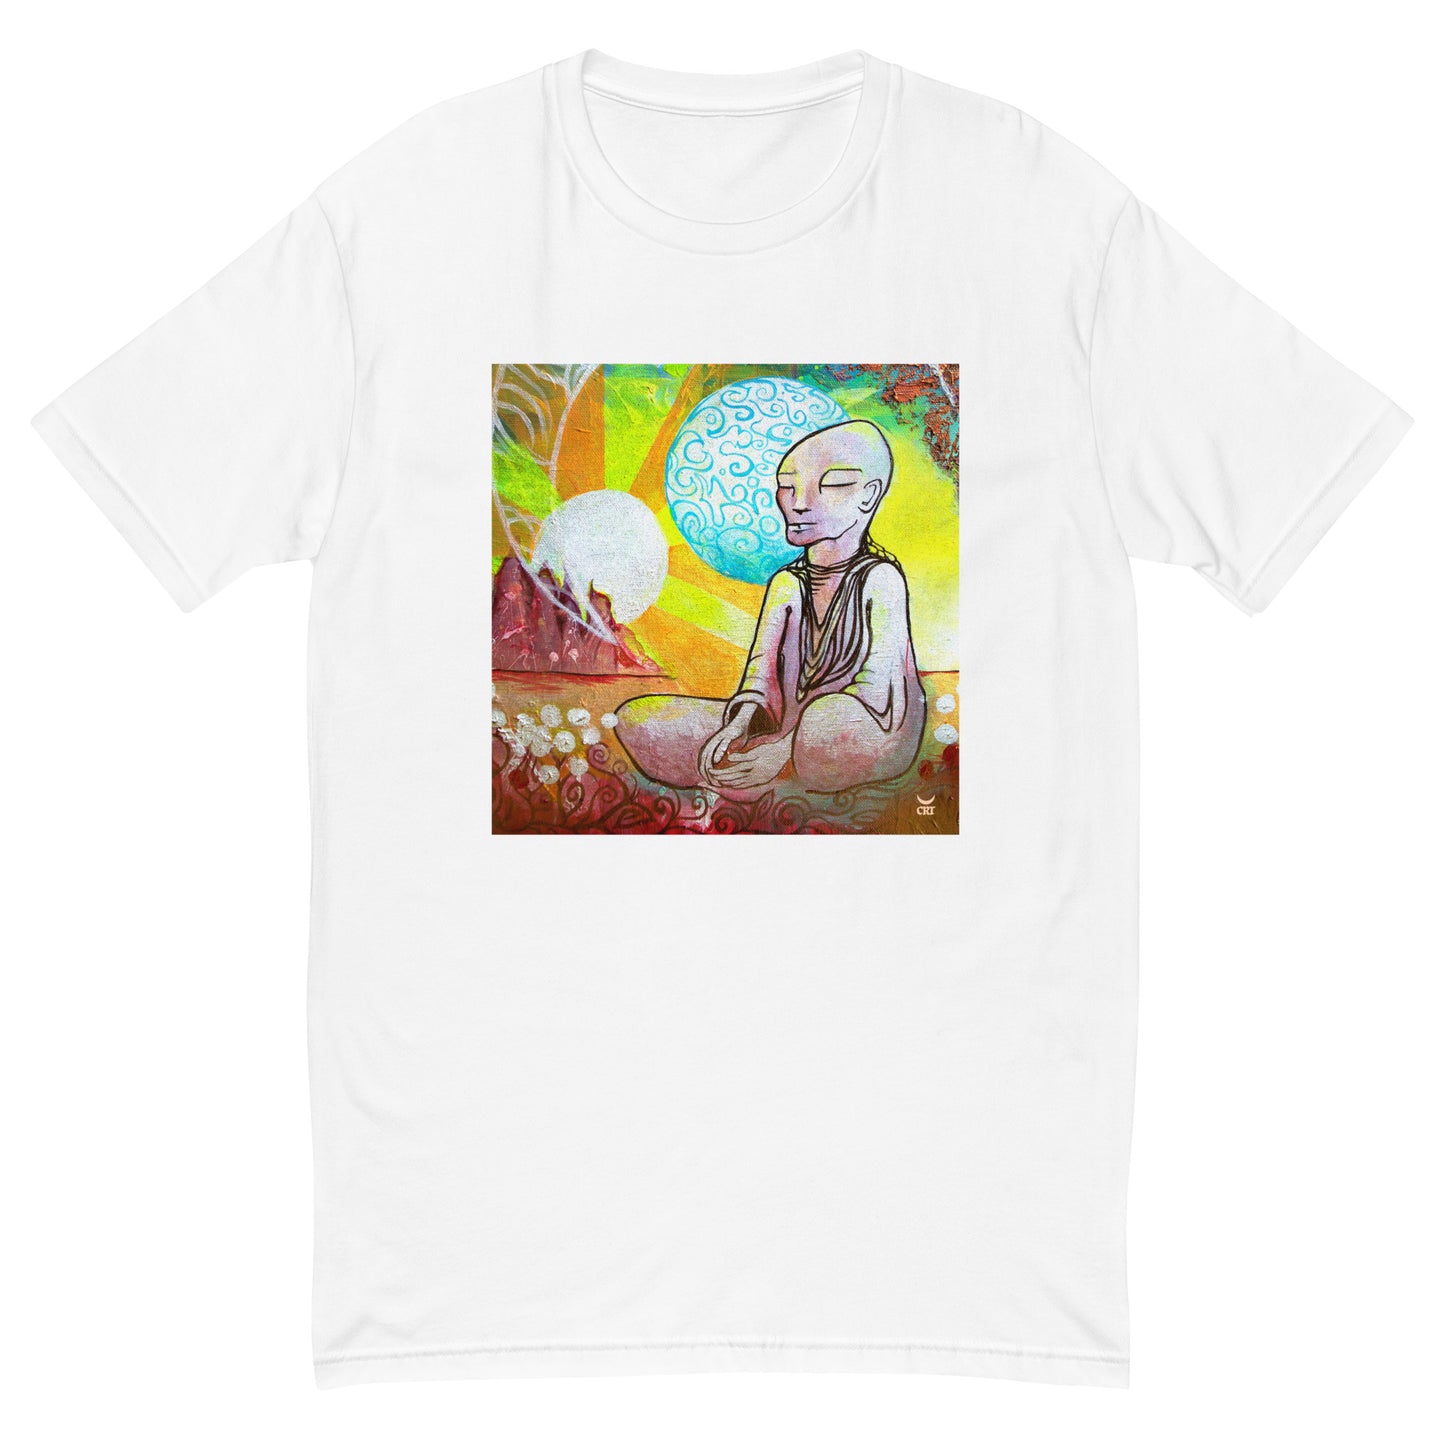 Meditation Man - Men's Fitted Tee